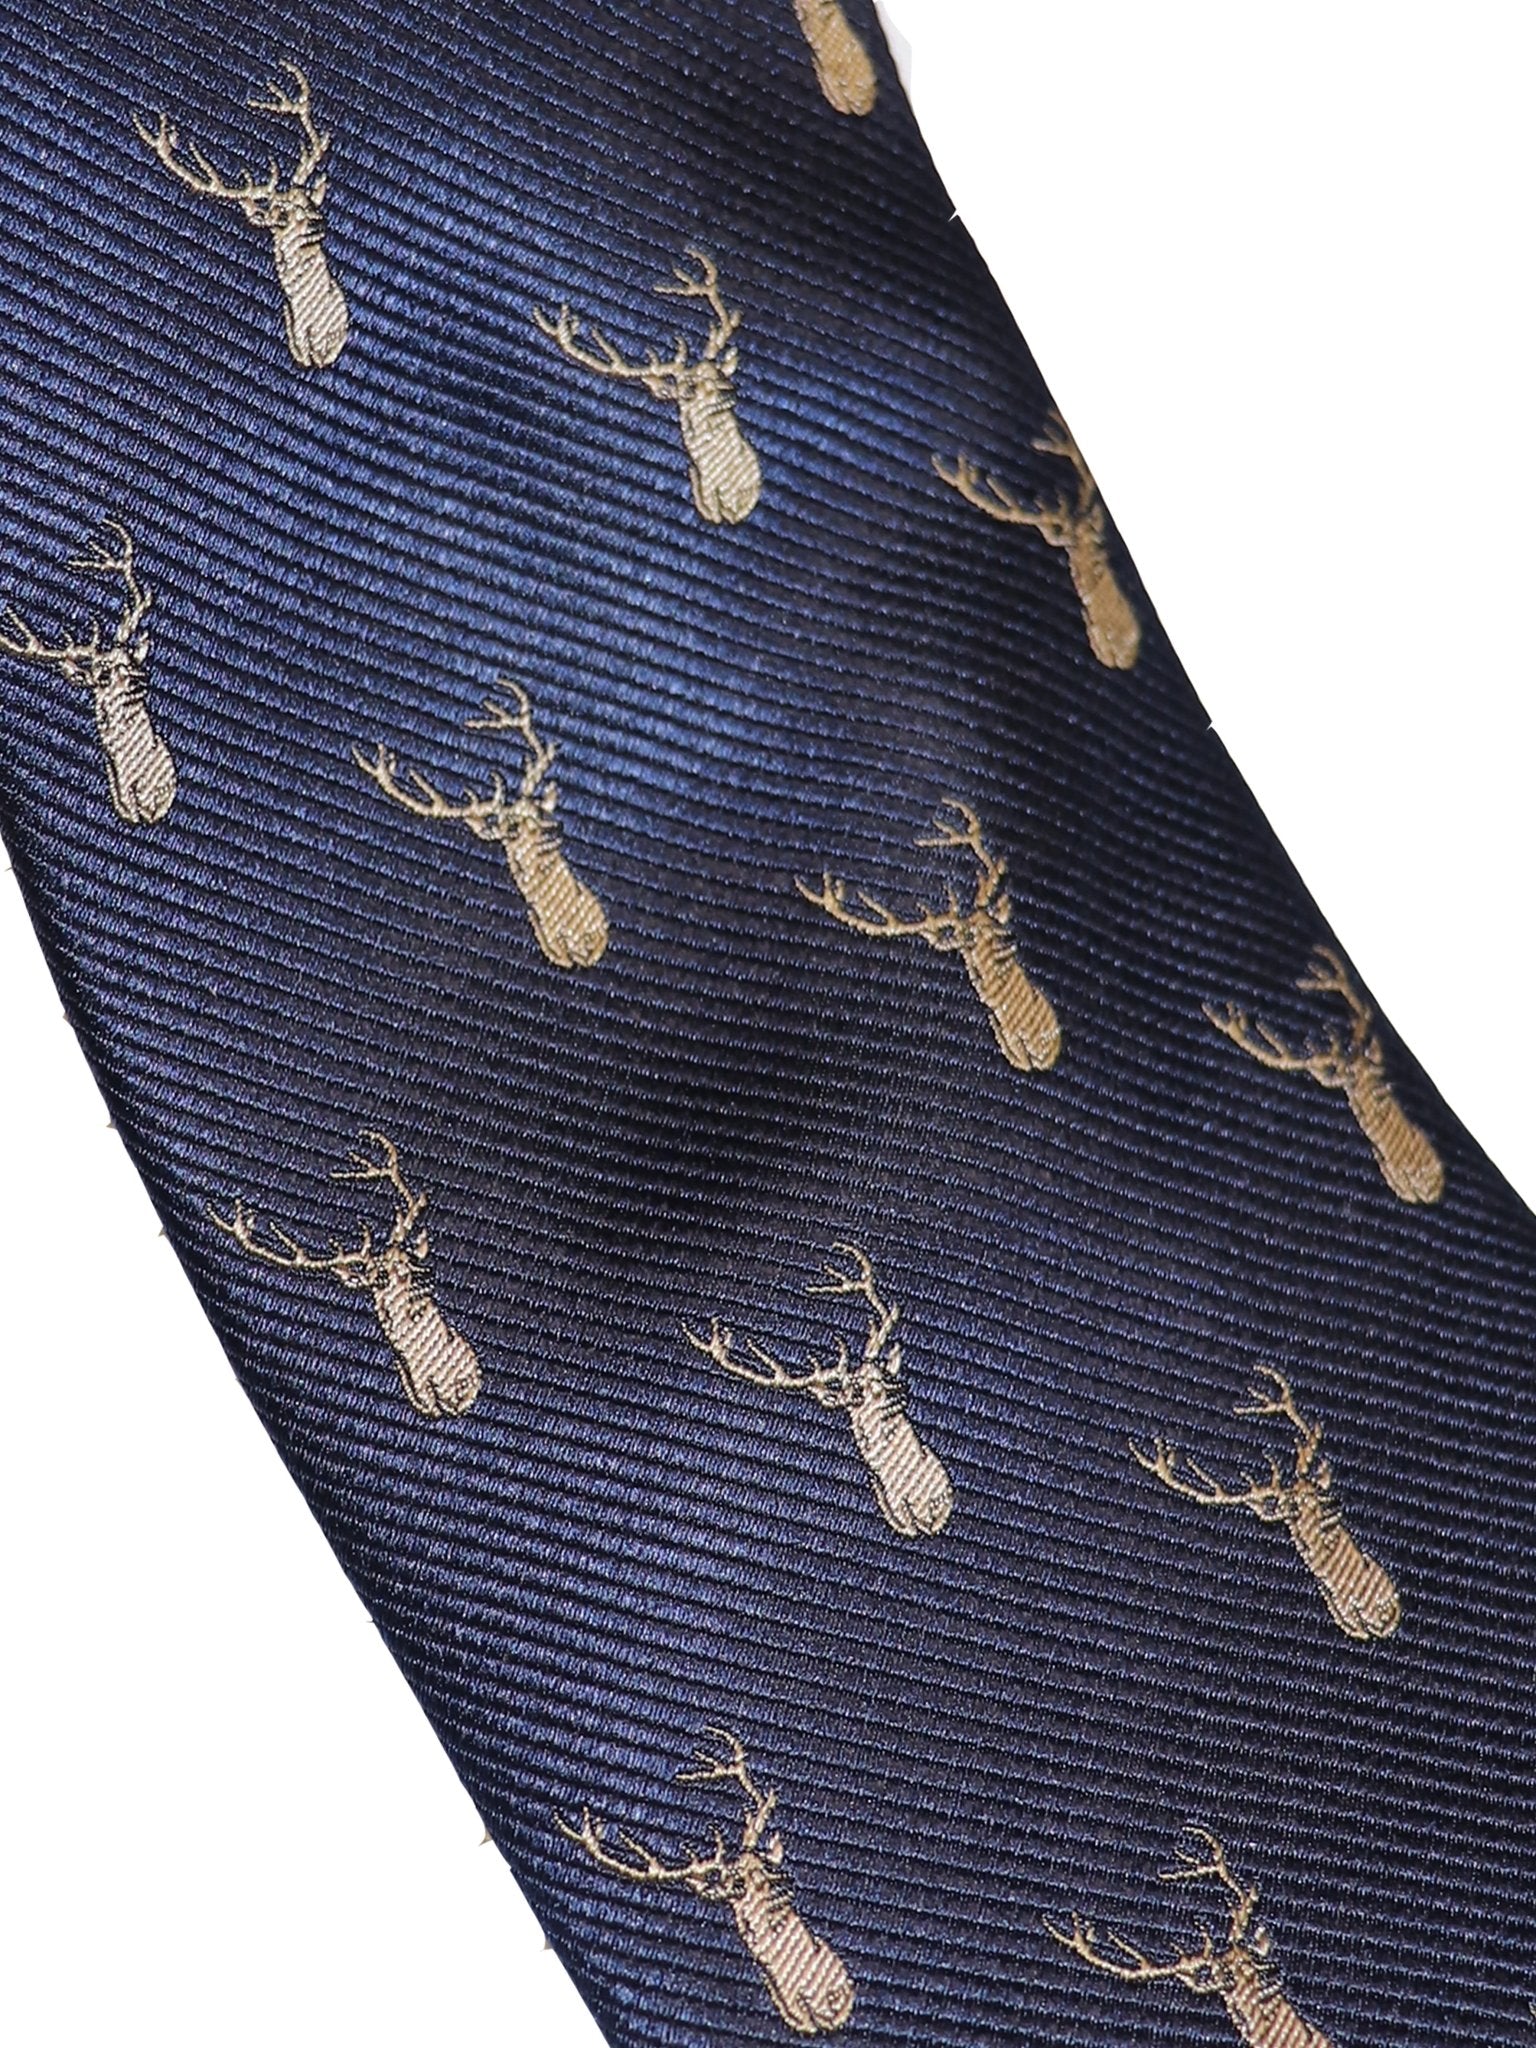 Harry Knight Esq. Stag Tie - Thomson's Suits Ltd - Red - - 51228